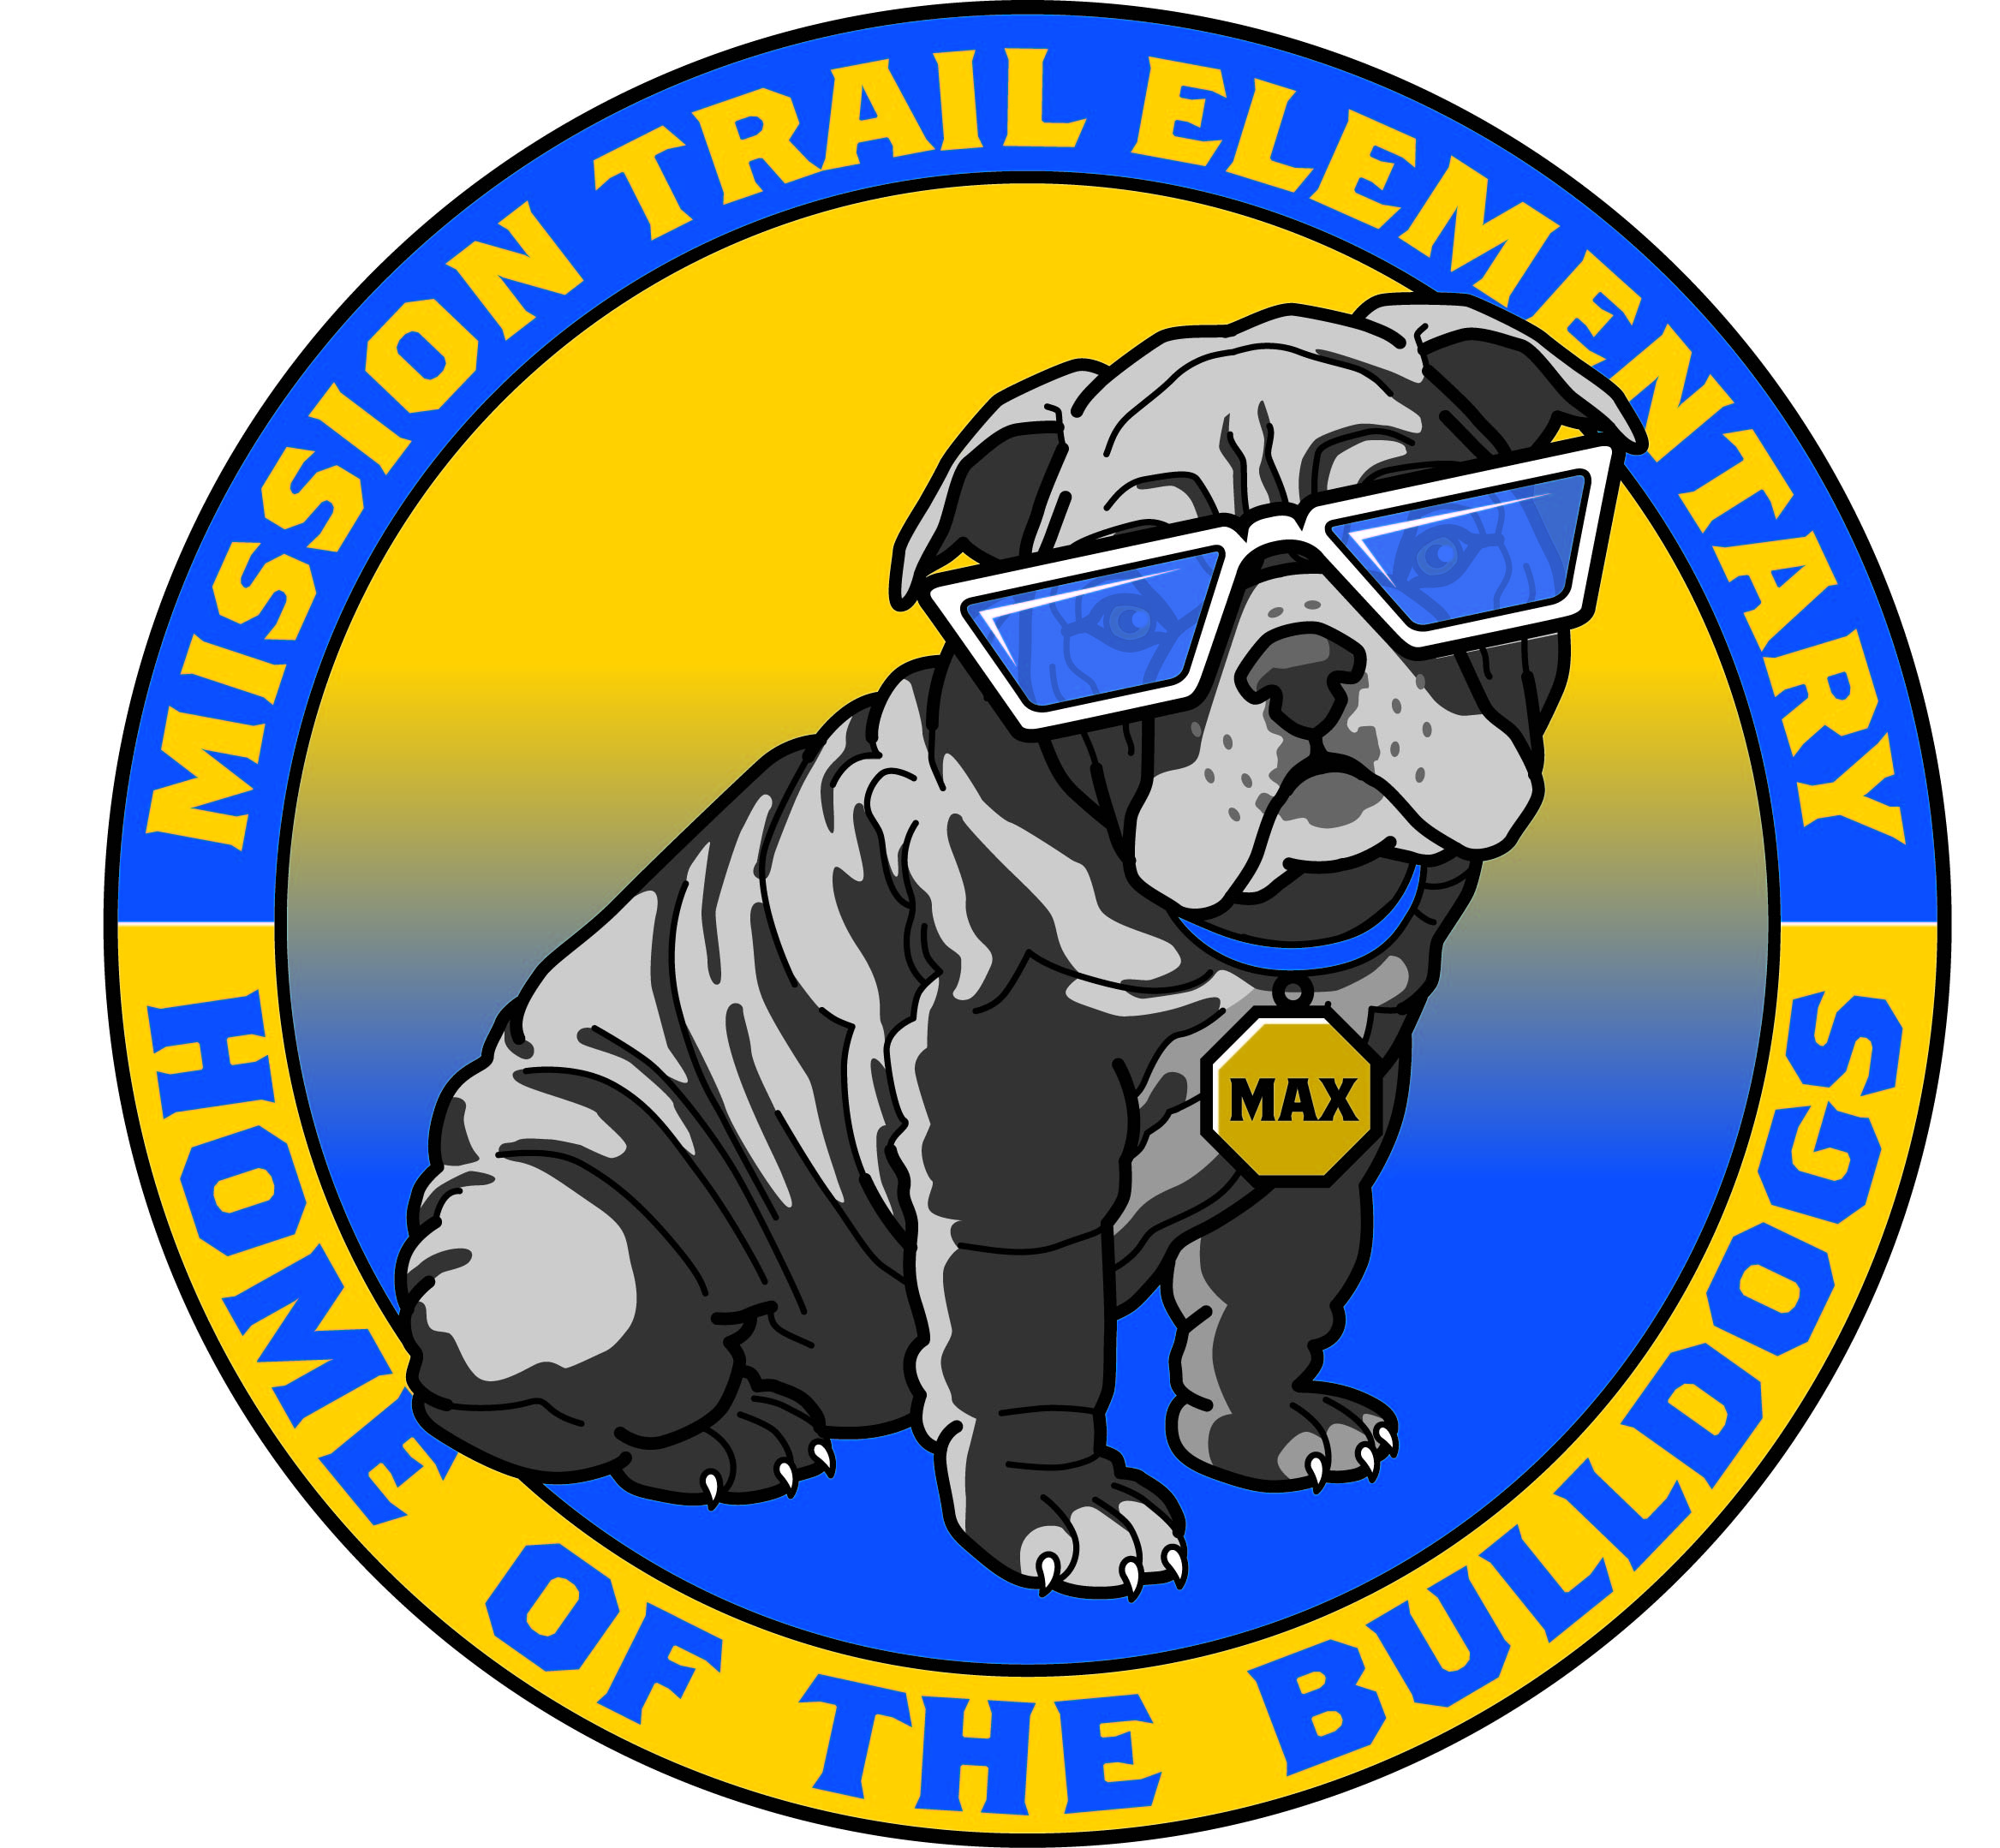 Mission Trail Elementary: Home of the Bulldogs